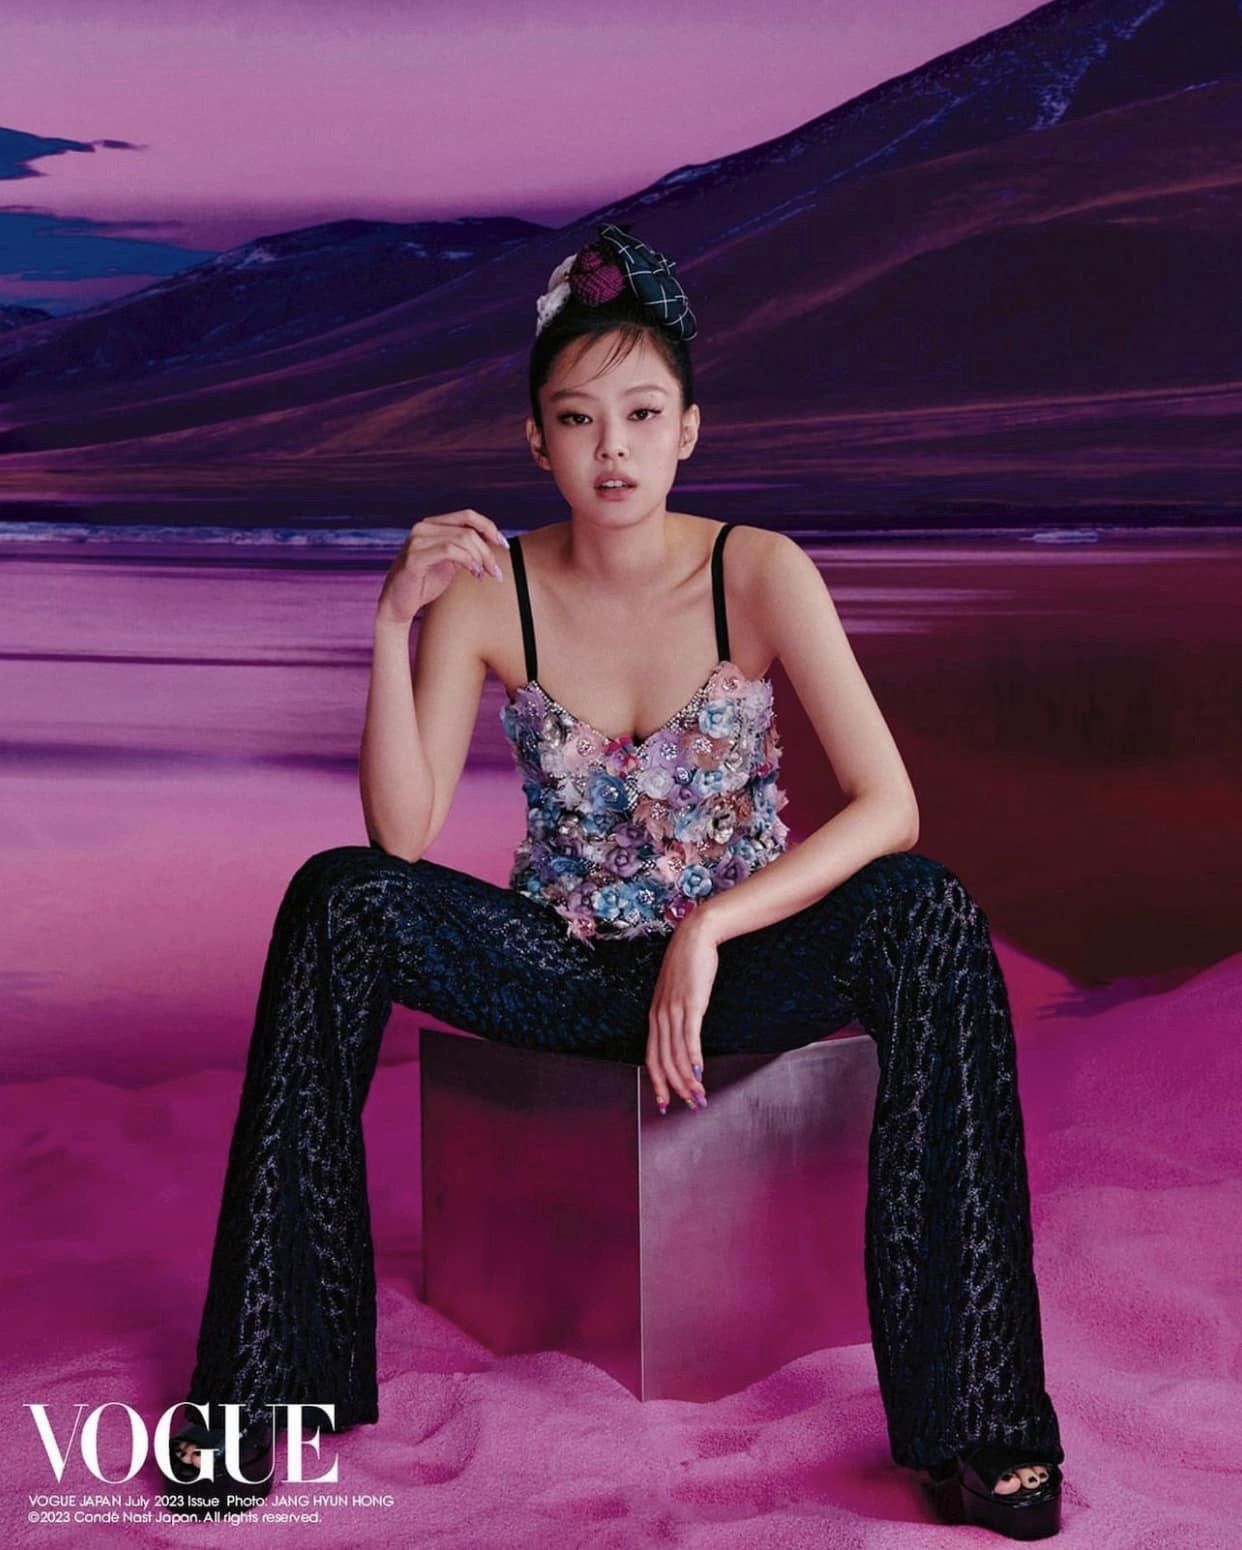 Jennie (BLACKPINK) on the cover of Vogue Japan: The ability to weigh things and "take pictures" has no point of criticizing photos 2